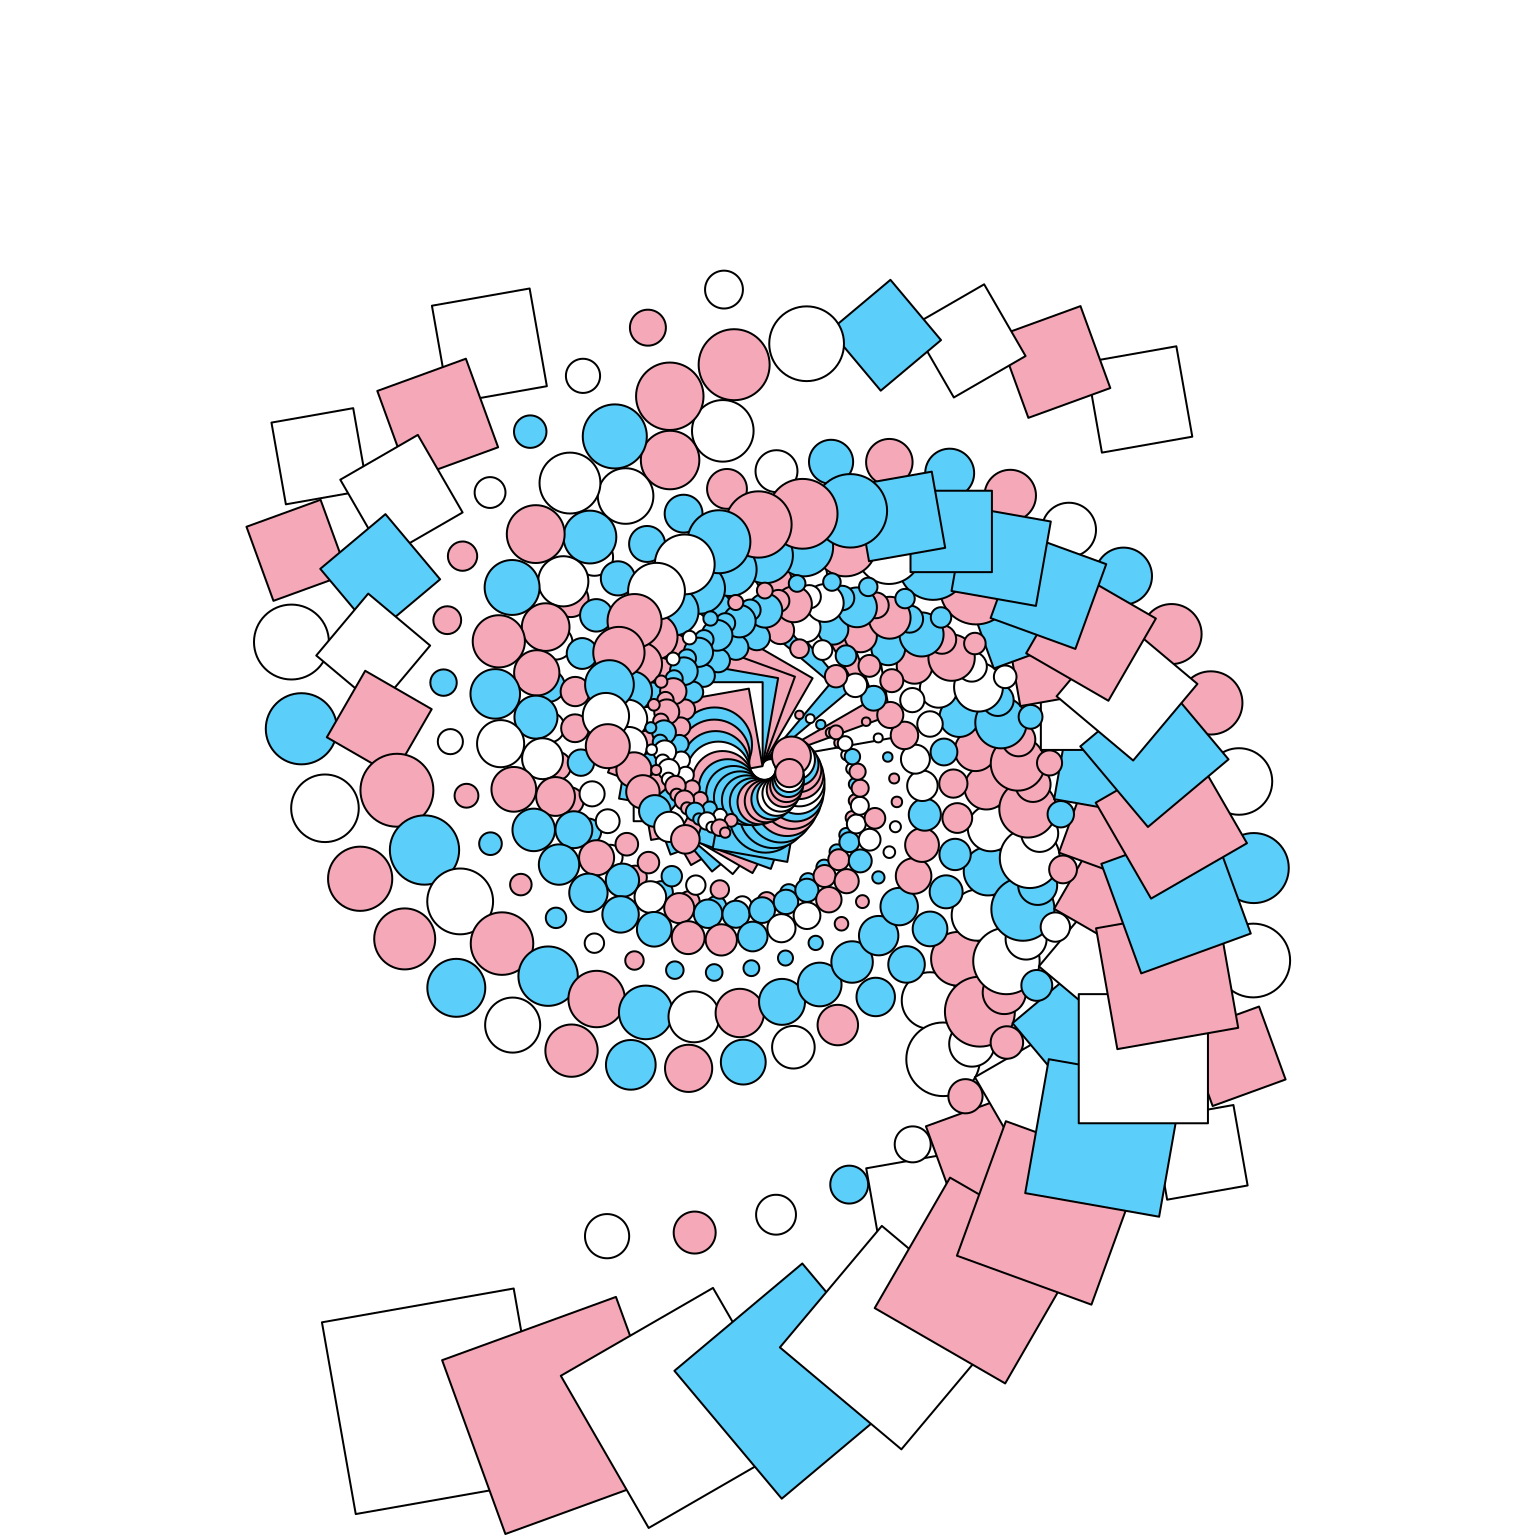 Spiralling squares and circles in blue, pink, and white